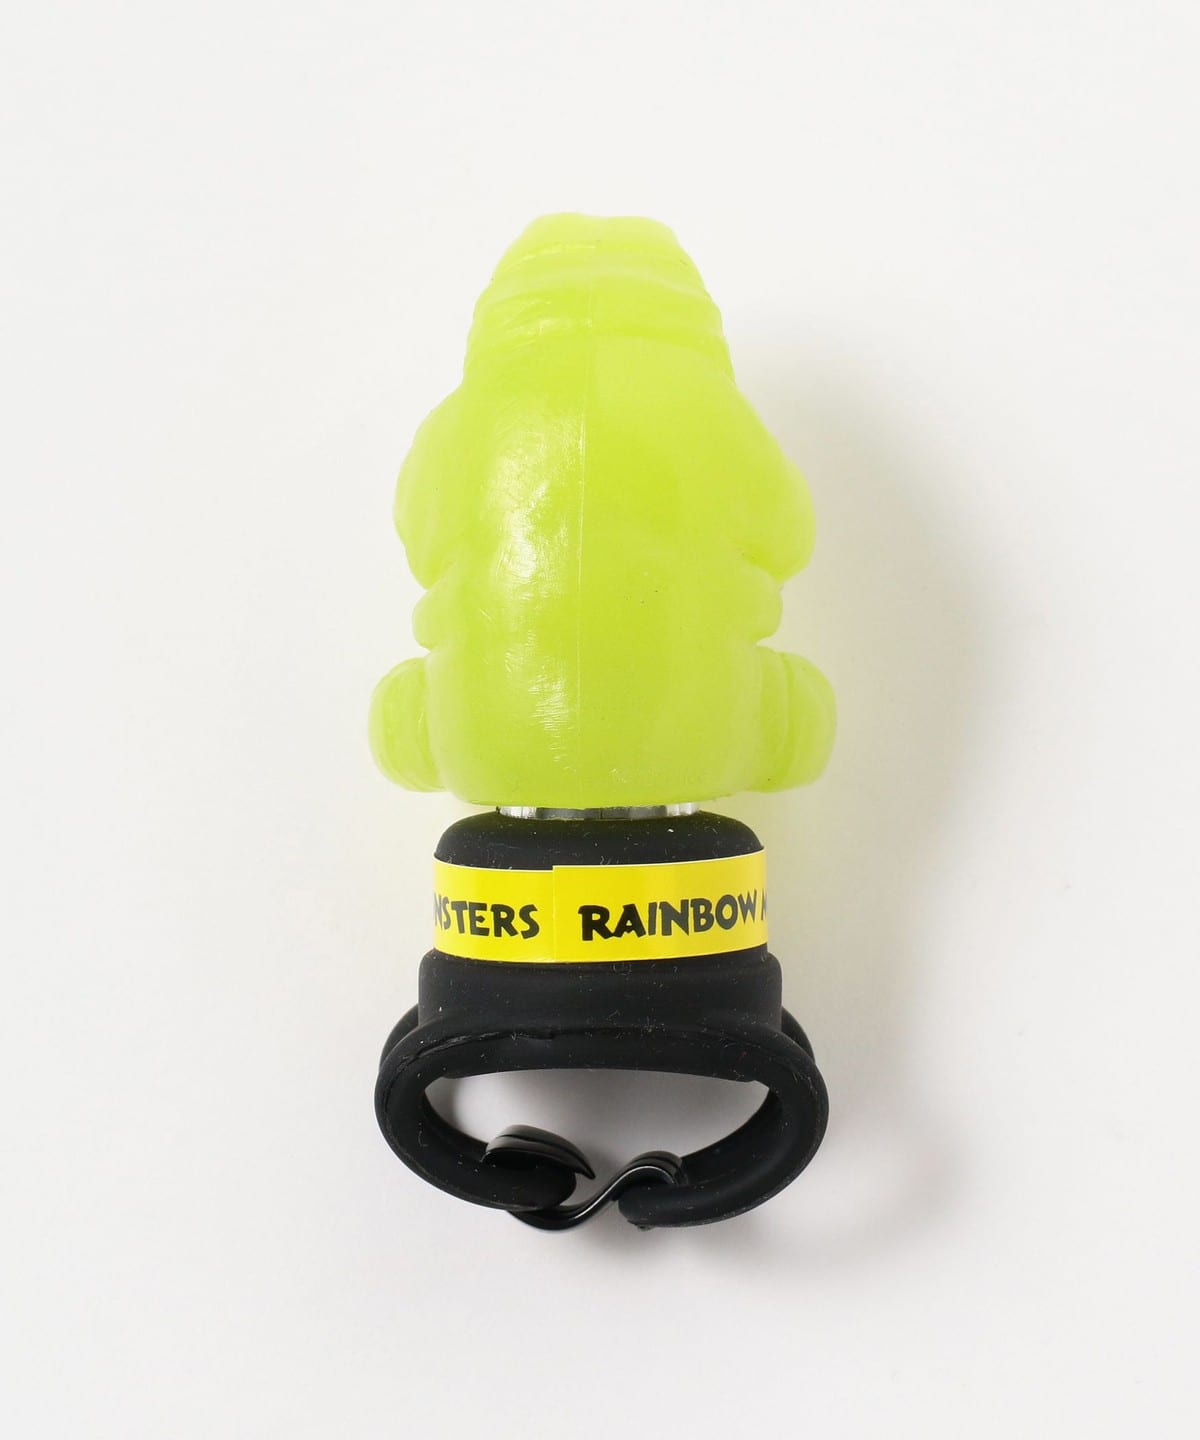 bPr BEAMS (bPr BEAMS) RAINBOW MONSTER S / LED Light (for bicycles) 2  (Outdoors